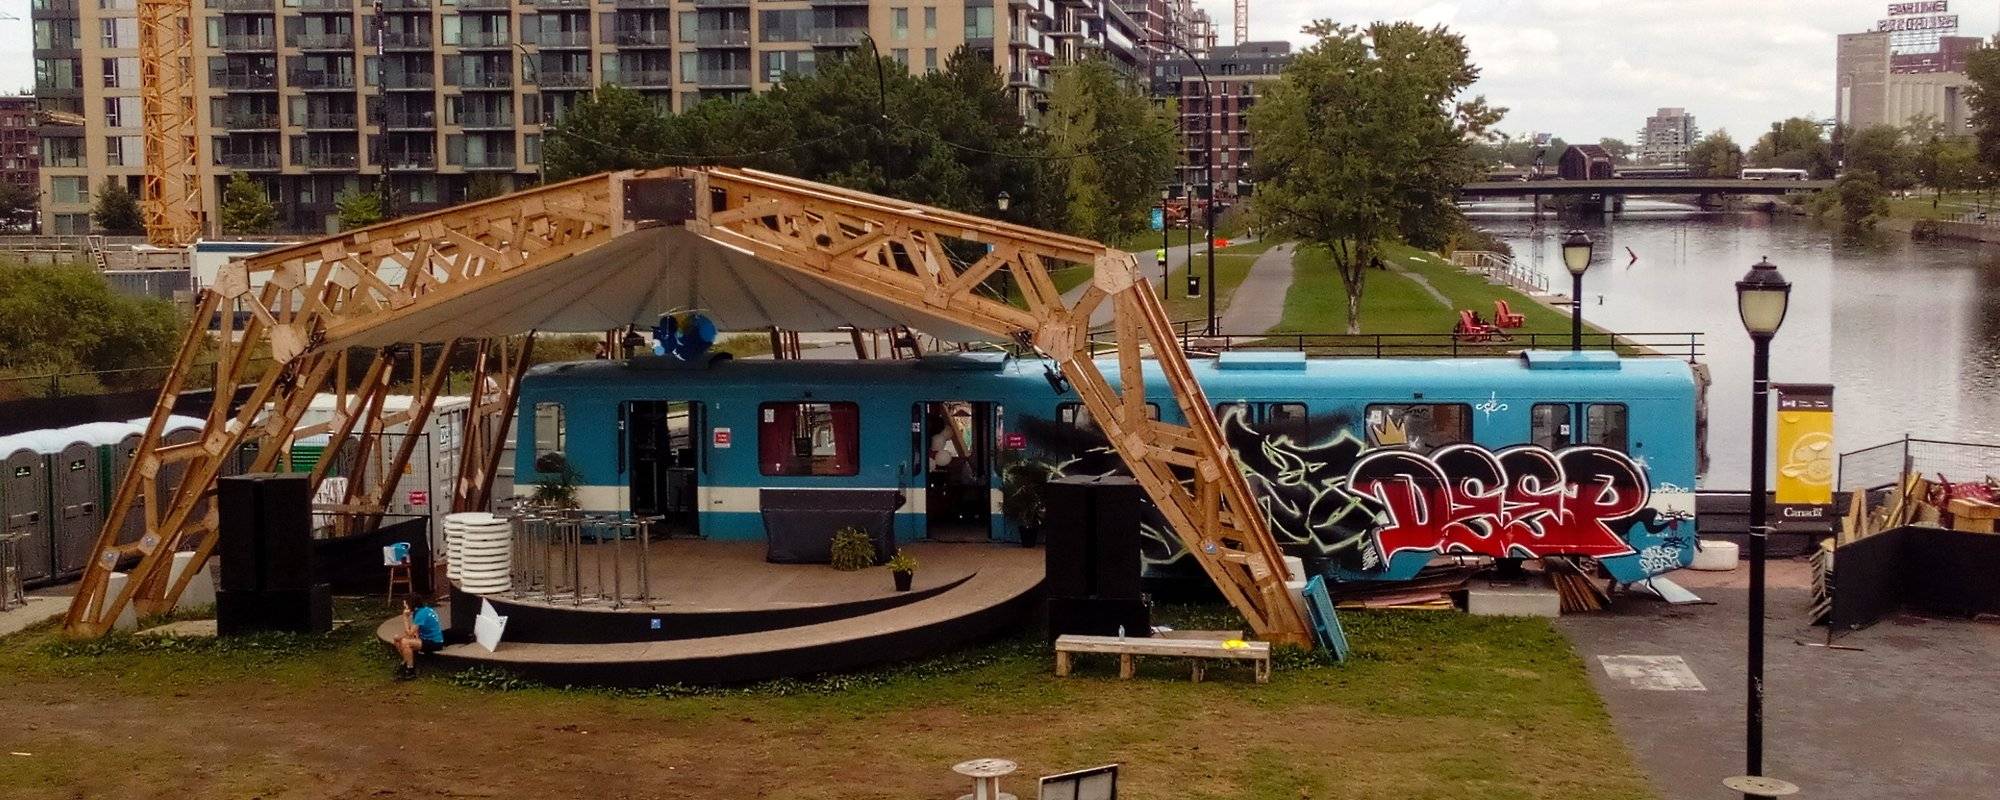 F-MR Station - best hang out spot along the Lachine Canal